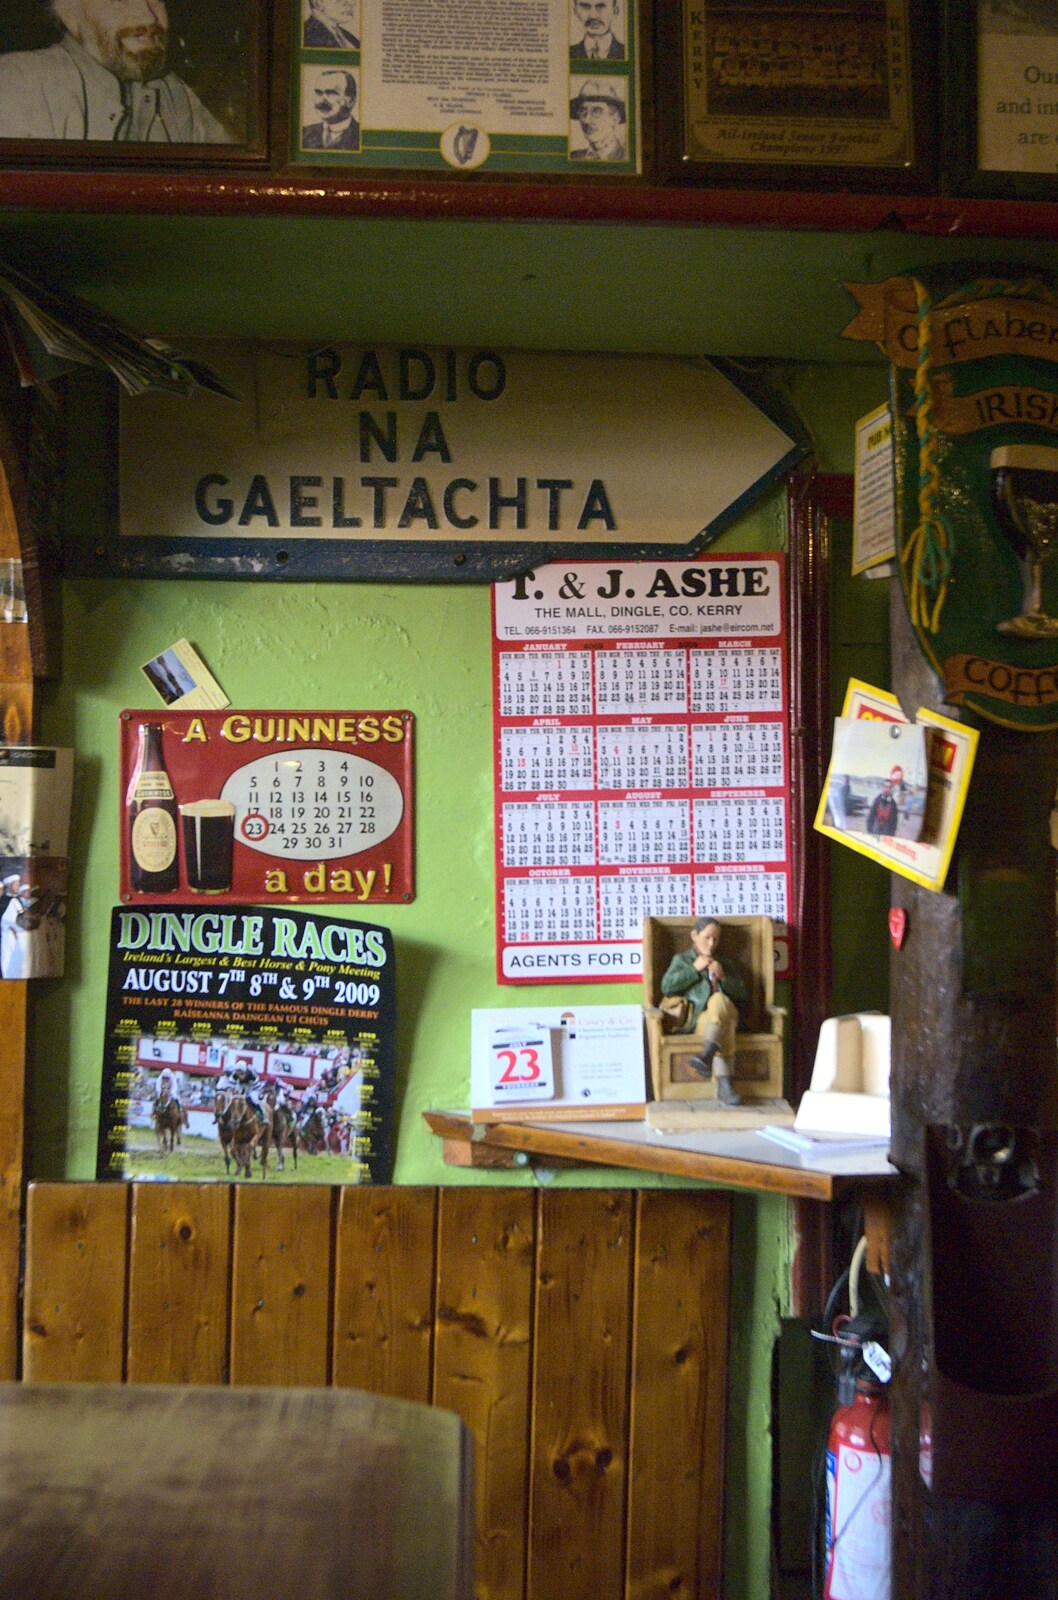 A Radio na Gaeltachta sign from A Trip to Dingle, County Kerry, Ireland - 21st July 2009